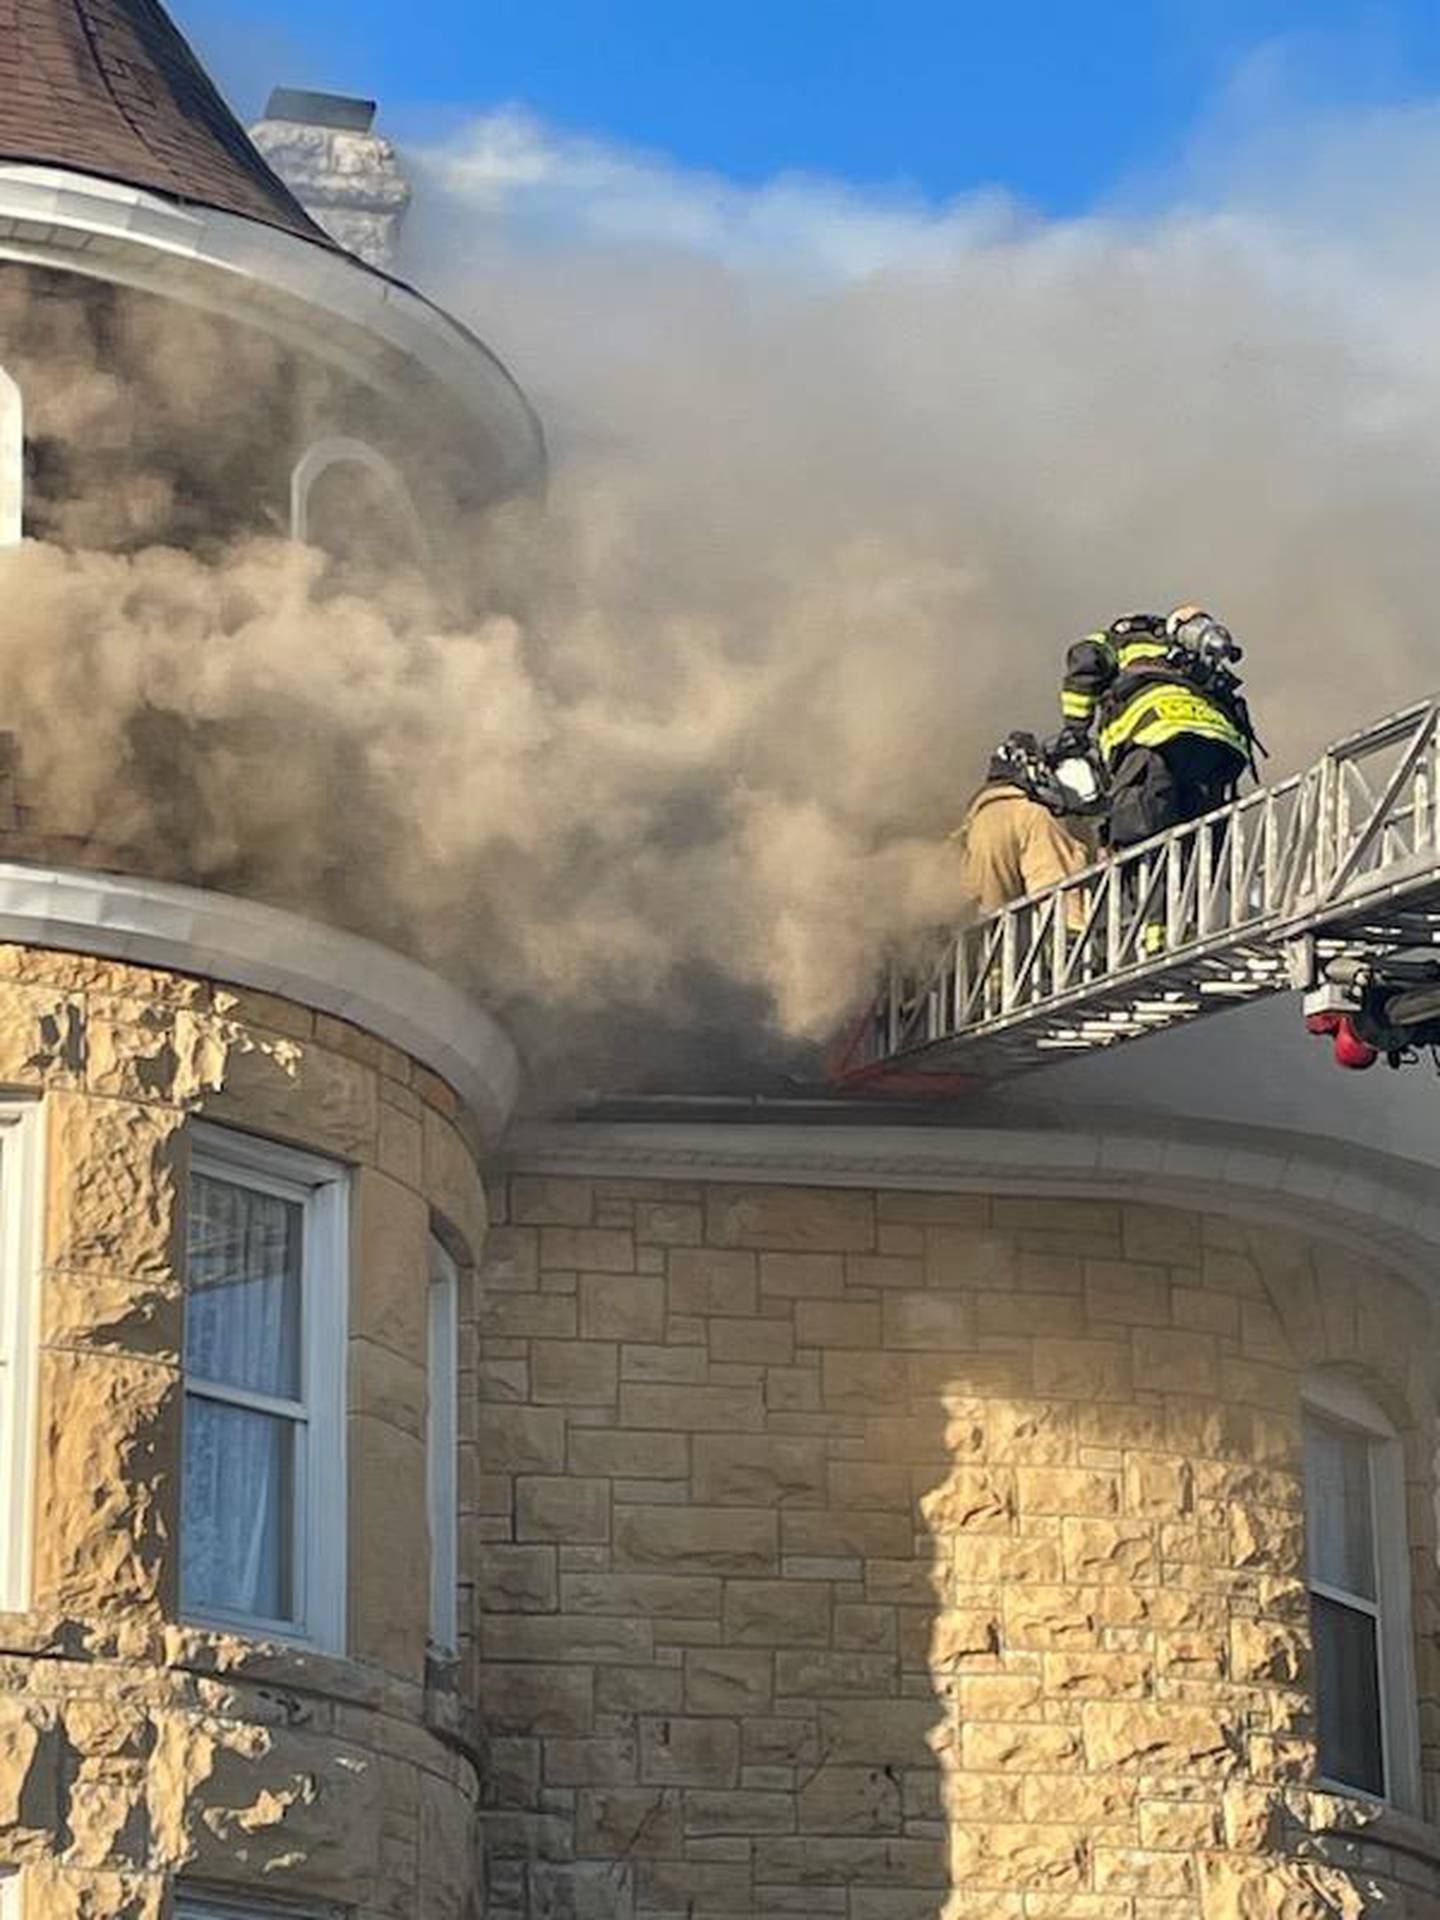 A fire broke out Wednesday afternoon at the Patrick Haley Mansion, located at 17 S. Center St.  in Joliet. Joliet firefighters brought the fire under control in 40 minutes. No inured were reported. The fire is under investigation.